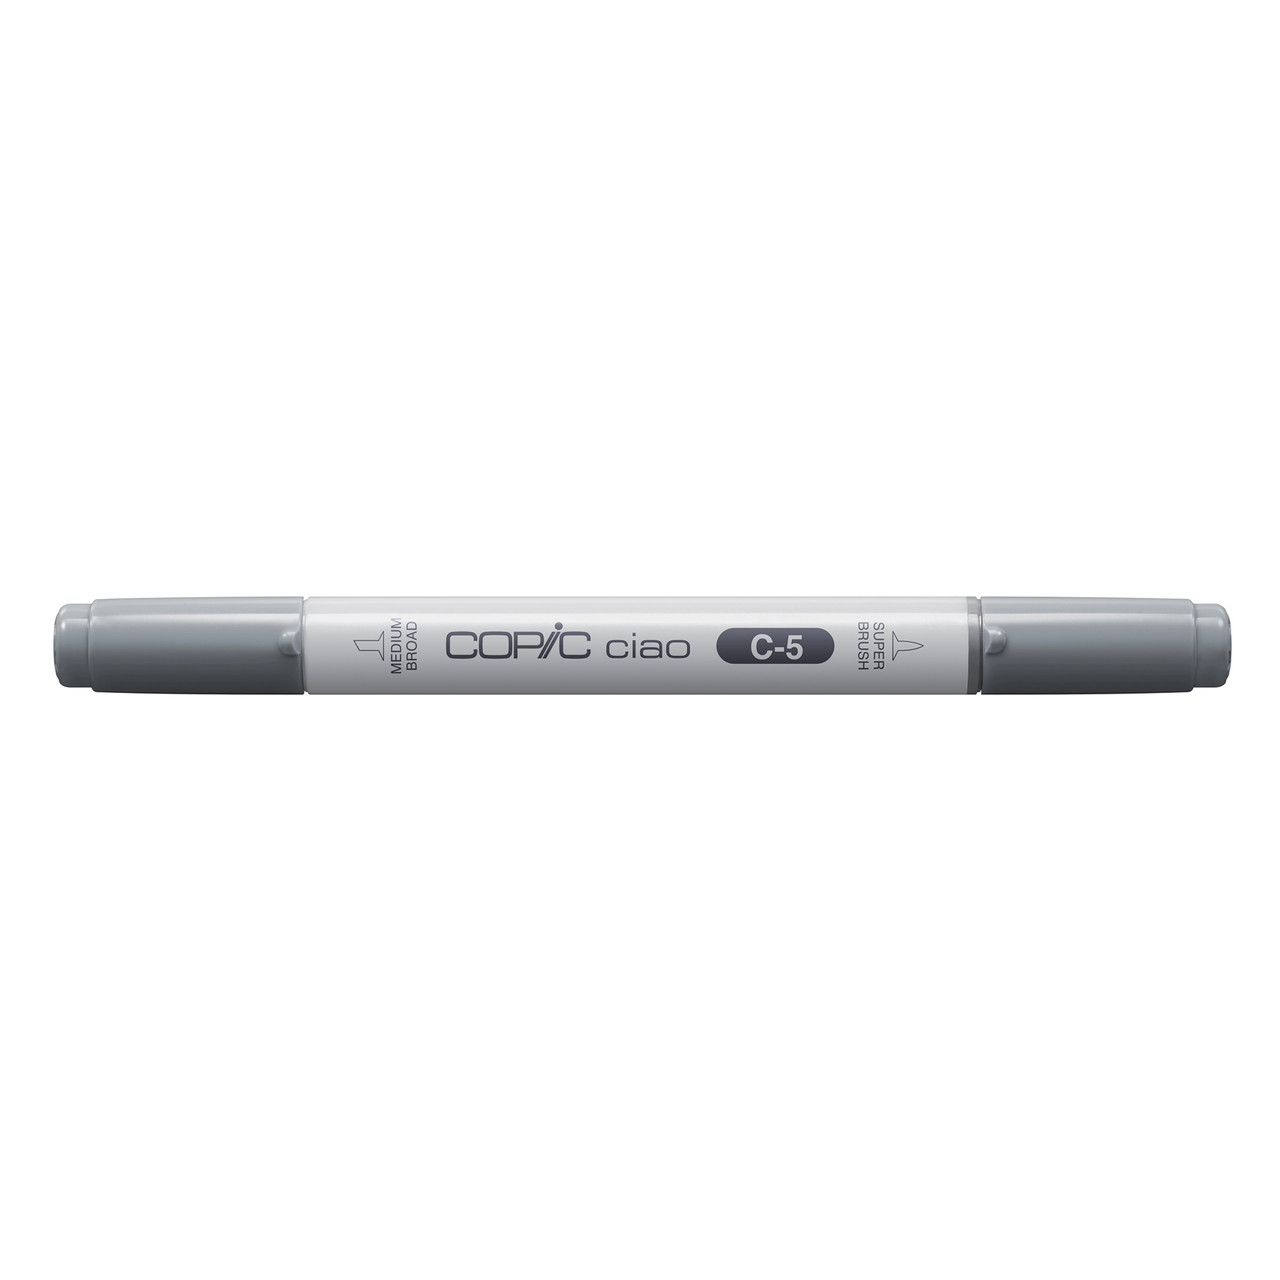 Copic Copic Ciao Marker Cool Gray No. 5 C-5 (One Size, Cool Grey No. 5 C5)